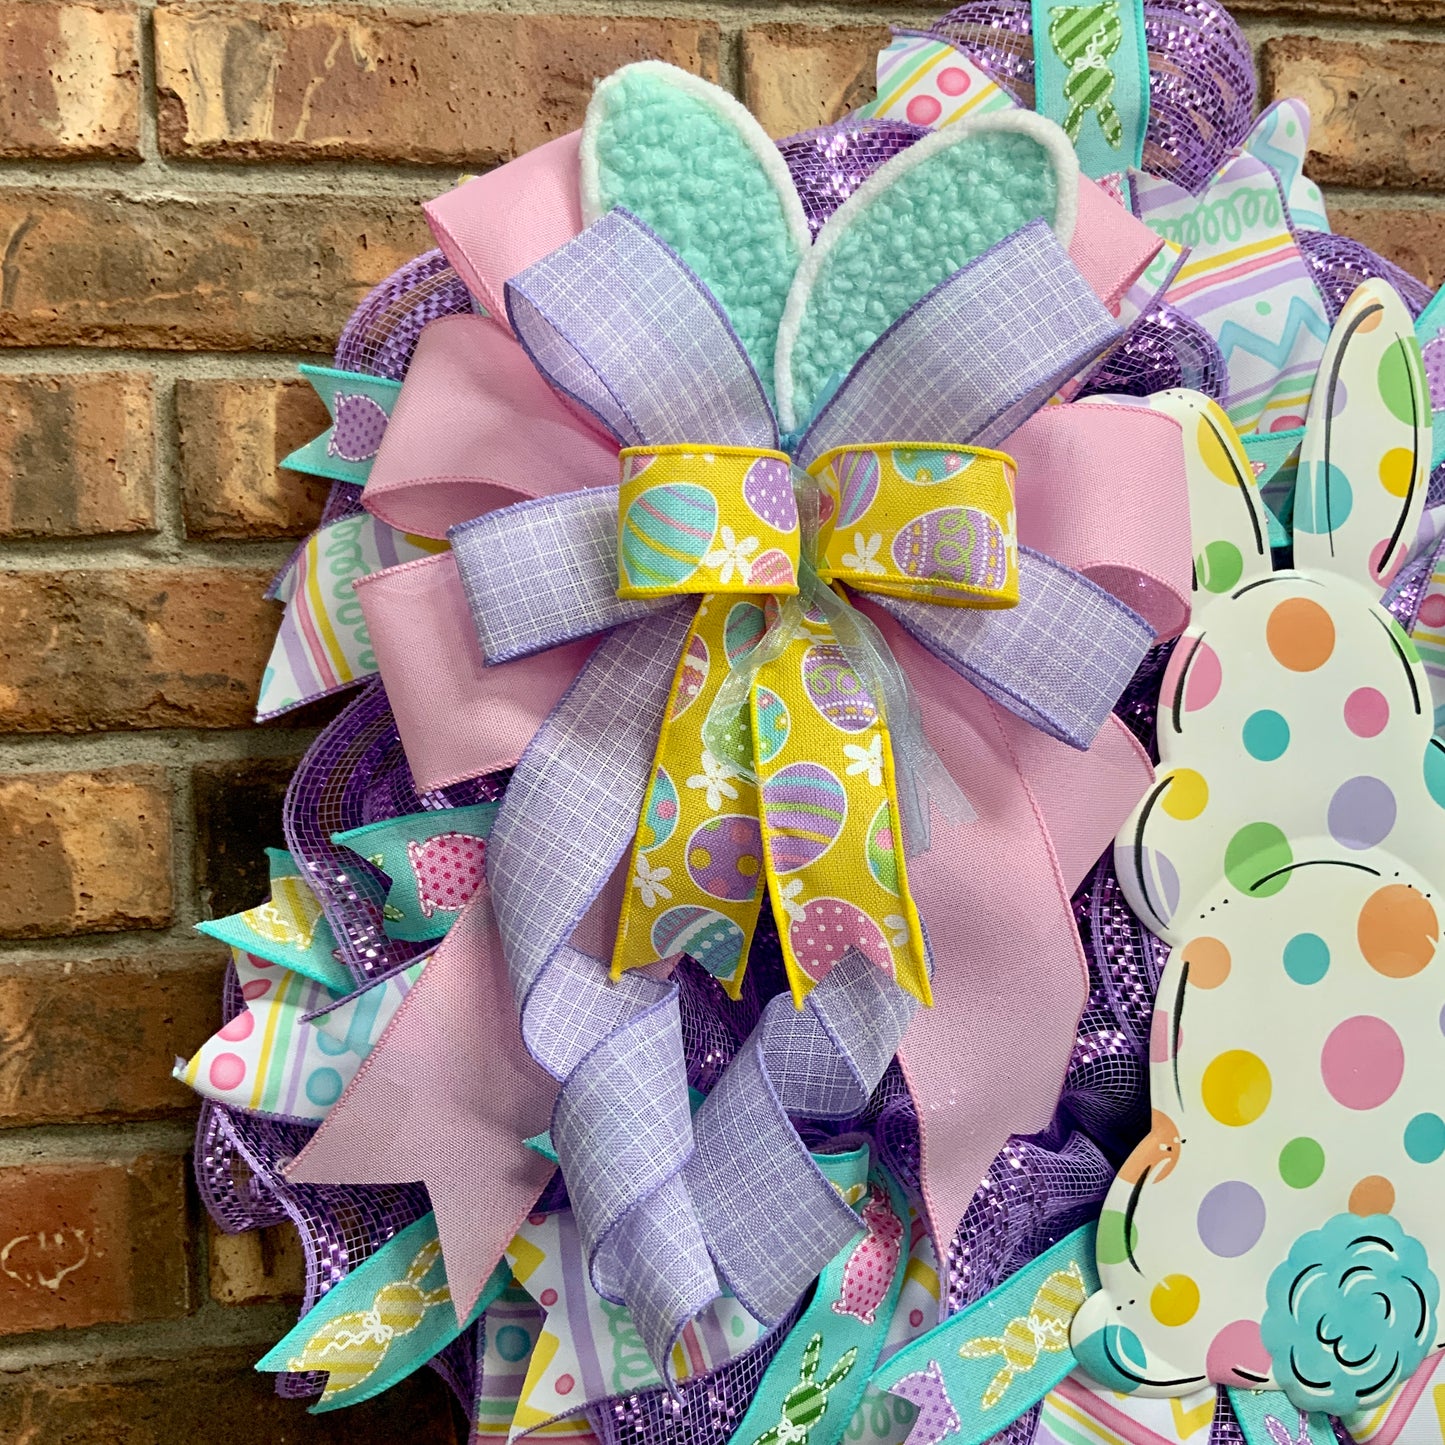 Easter Pancake Wreath, Easter Wreath For Front Door, Easter Rabbit Wreath, Easter Bunny Wreath, Easter Pastel Wreath, Spring Easter Wreath